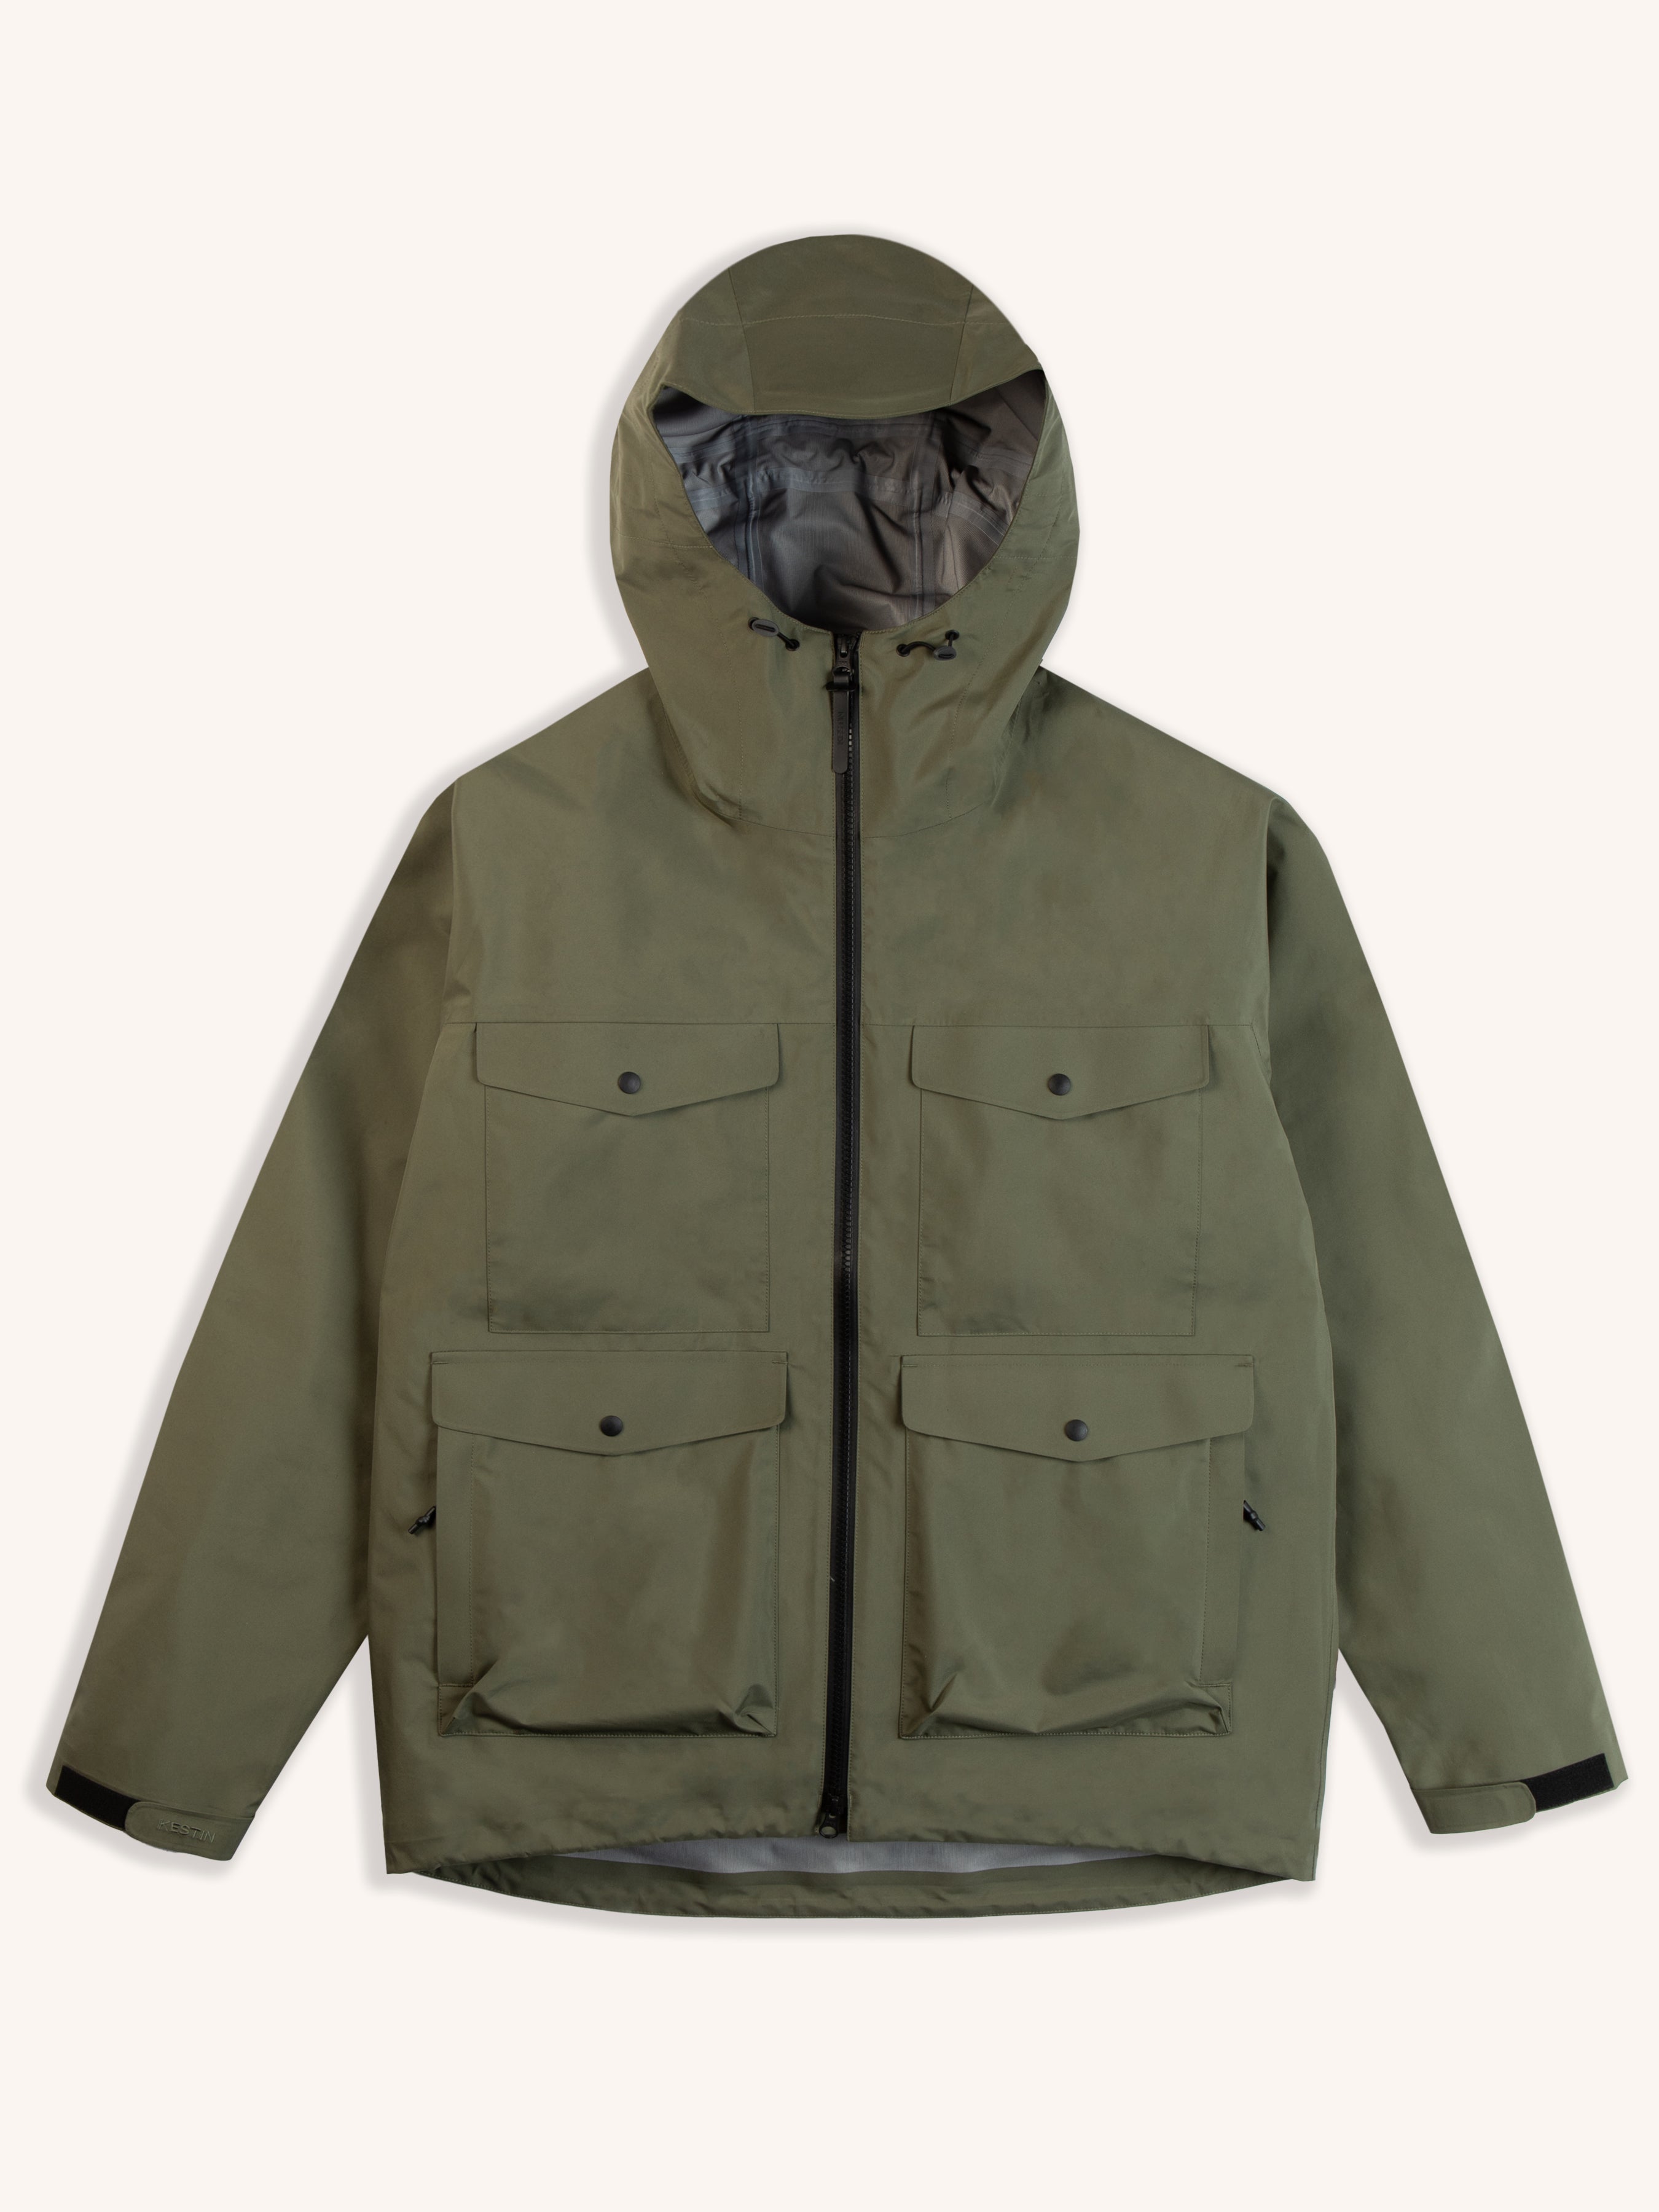 A technical waterproof shell jacket in green on a white background.